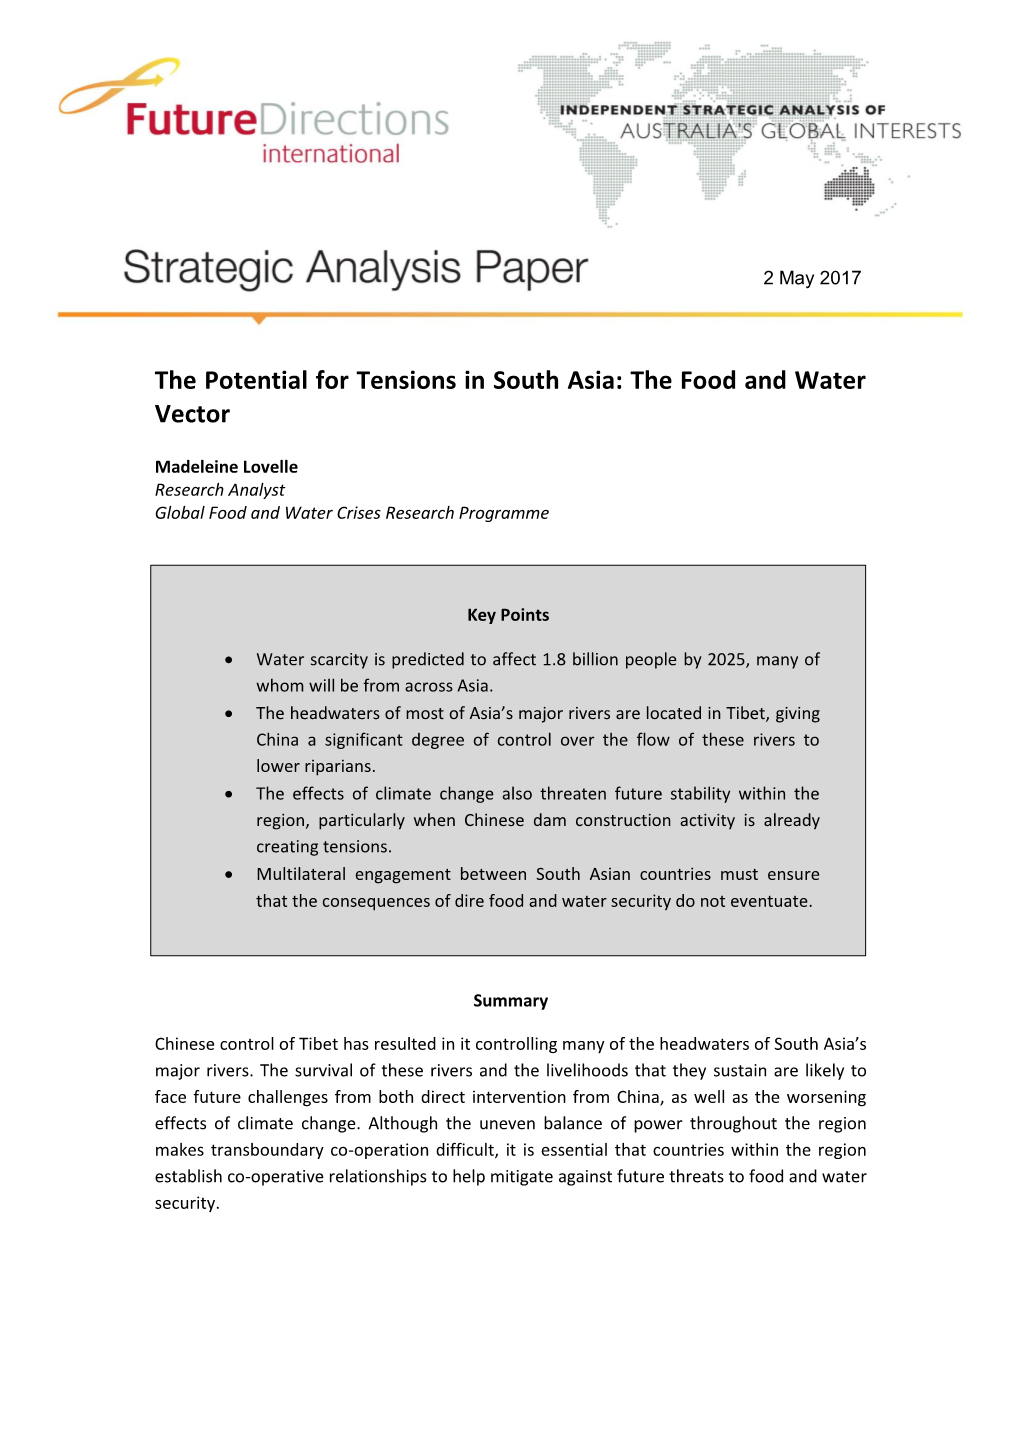 The Potential for Tensions in South Asia: the Food and Water Vector